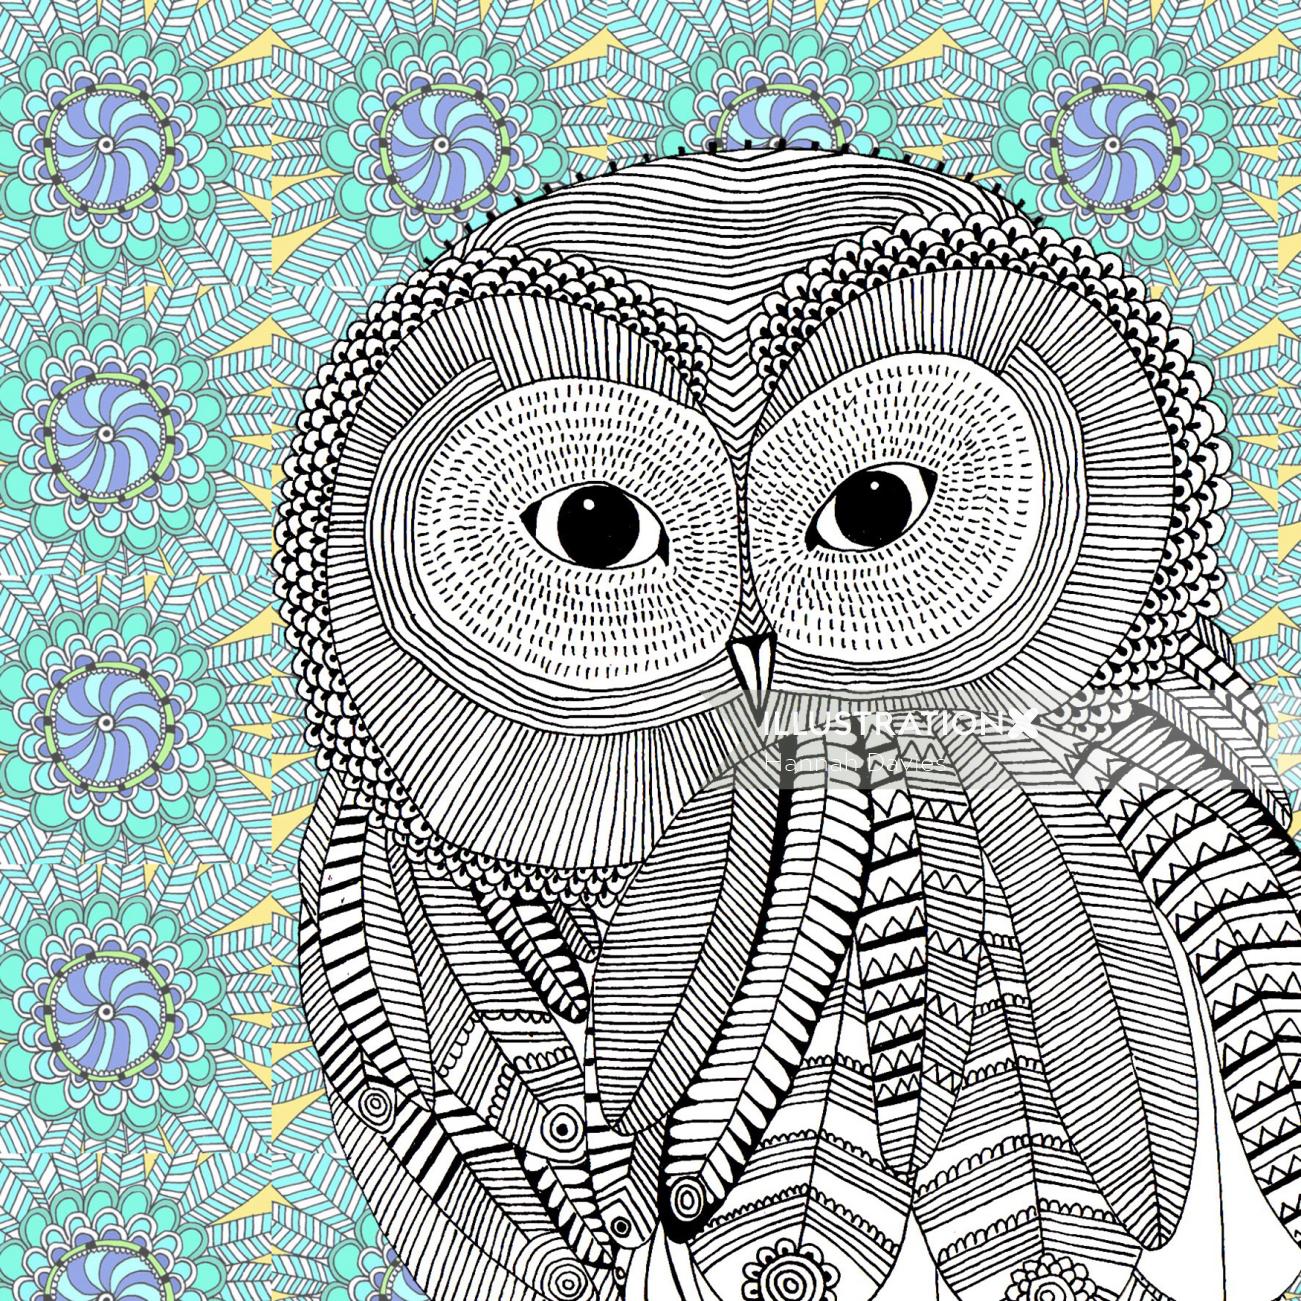 Owl in black and white - An illustration by Hannah Davies